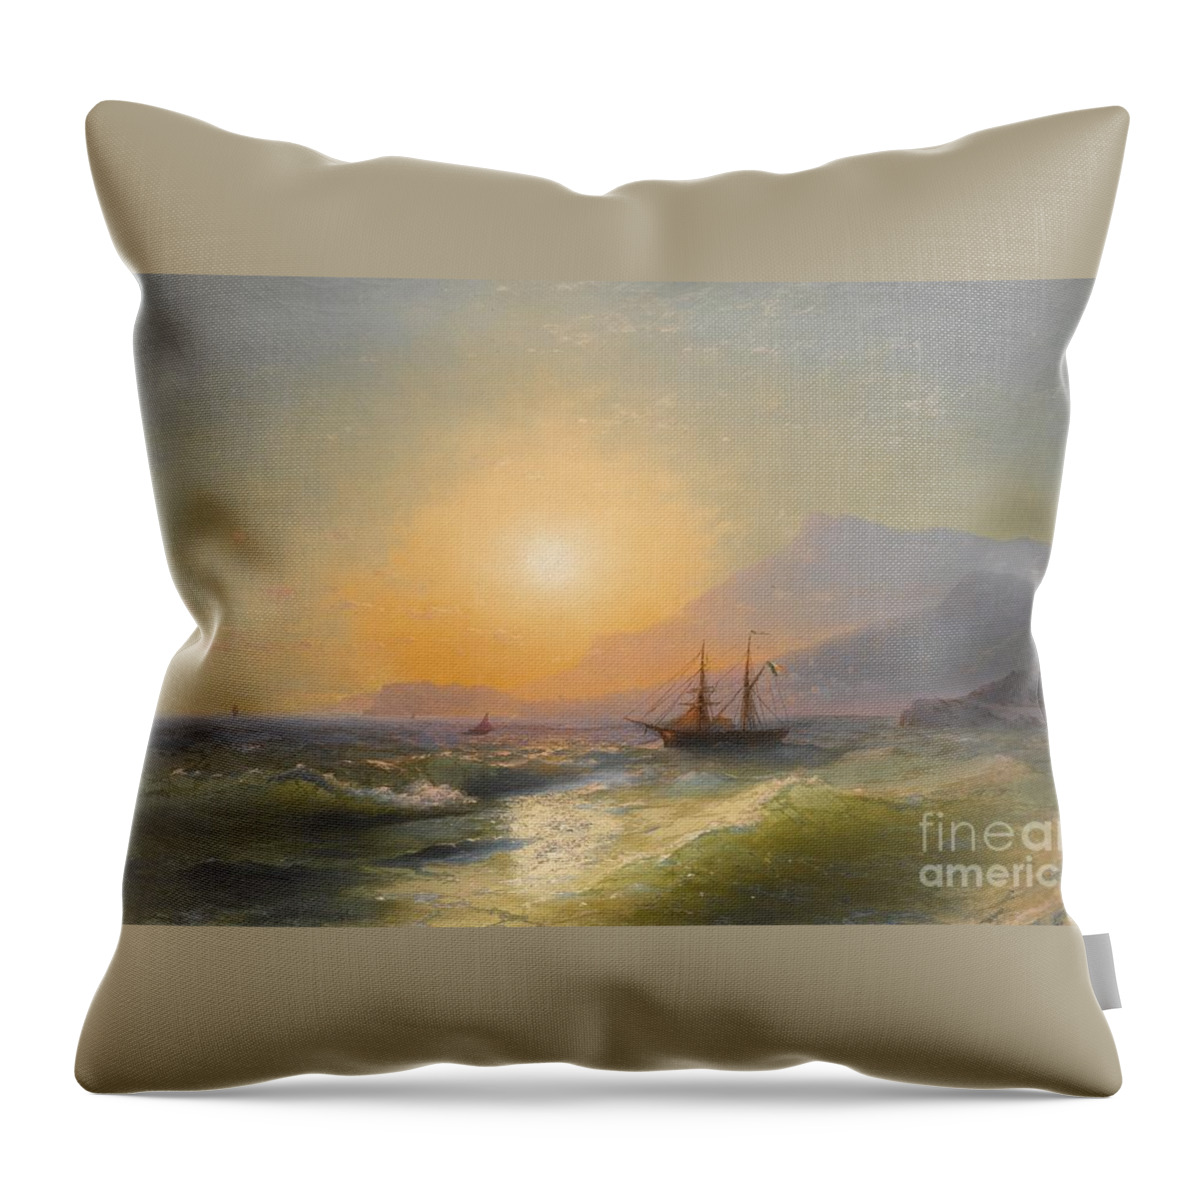 Ivan Konstantinovich Aivazovsky 1817-1900 View From Cap Martin With Monaco In The Distance. Sun Lighting Throw Pillow featuring the painting View From Cap Martin With Monaco In The Distance by MotionAge Designs